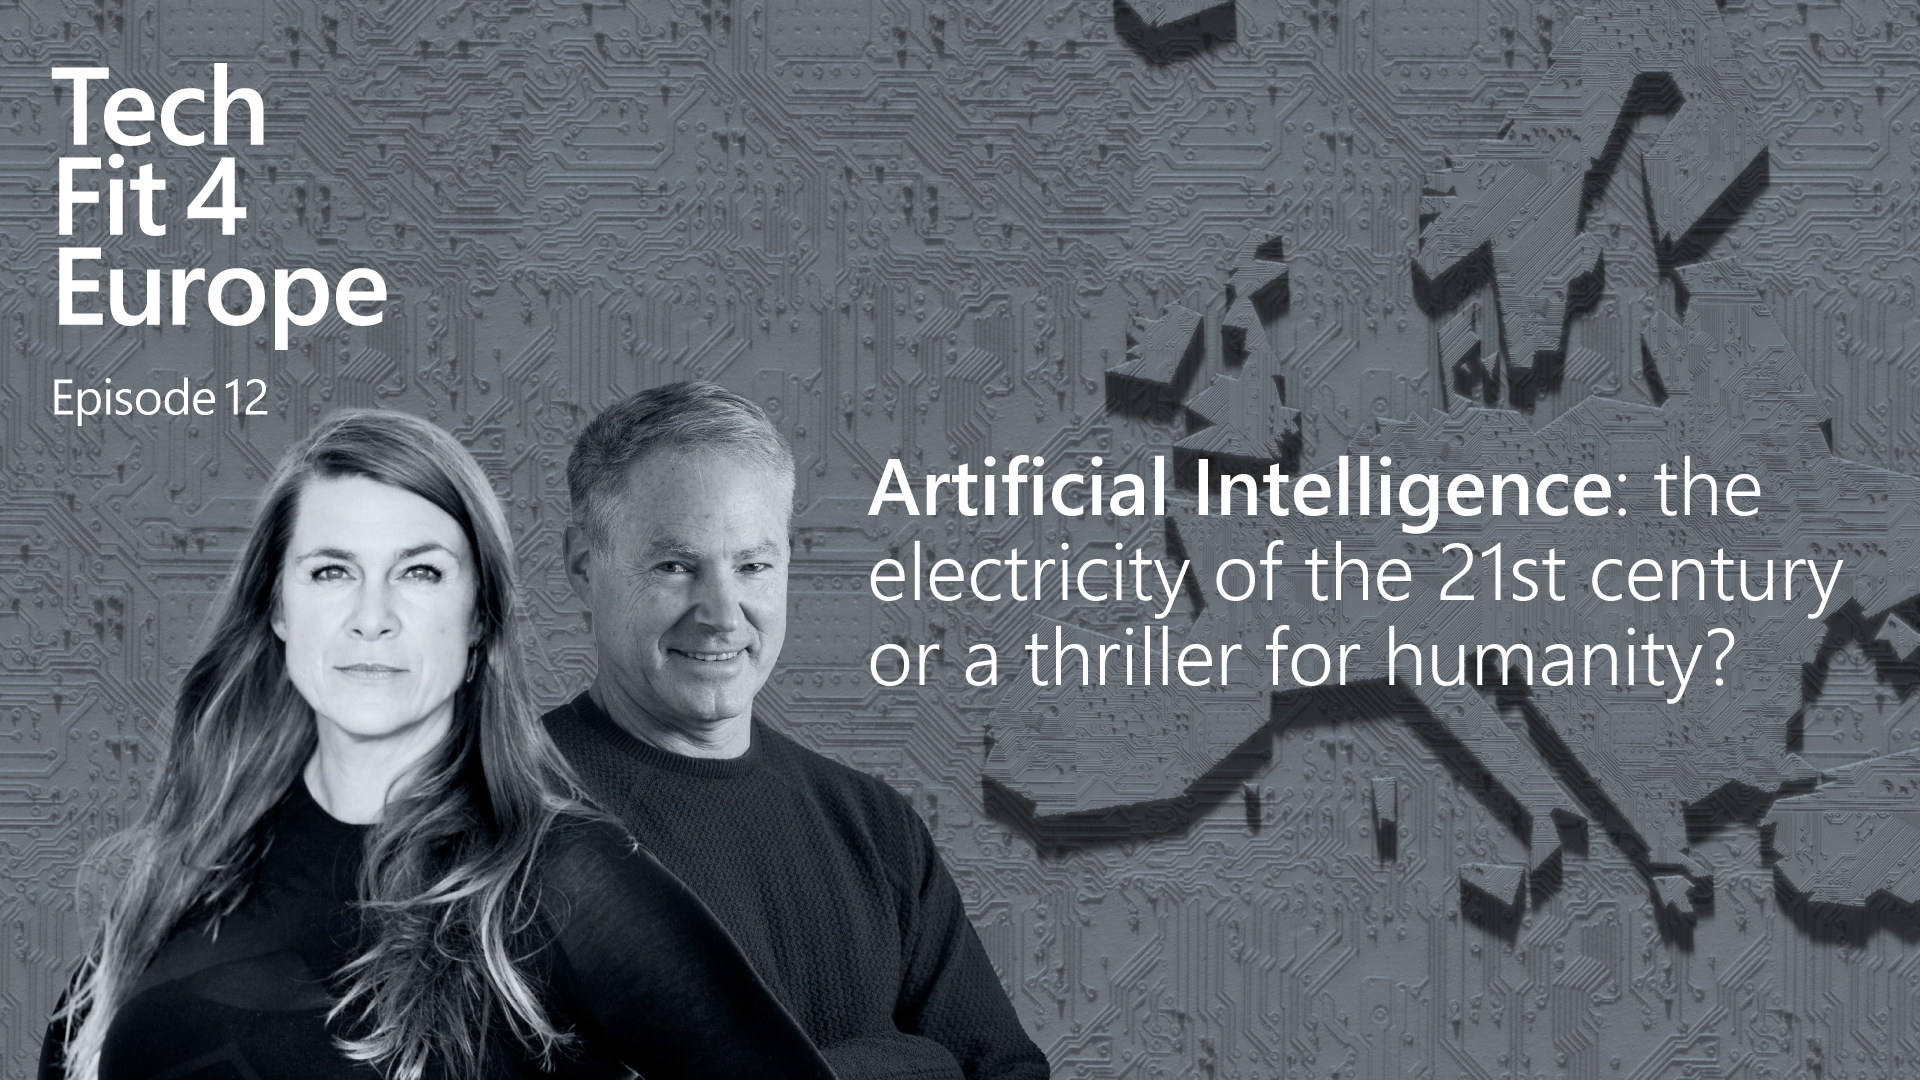 Artificial Intelligence: the electricity of the 21st century or a thriller for humanity?